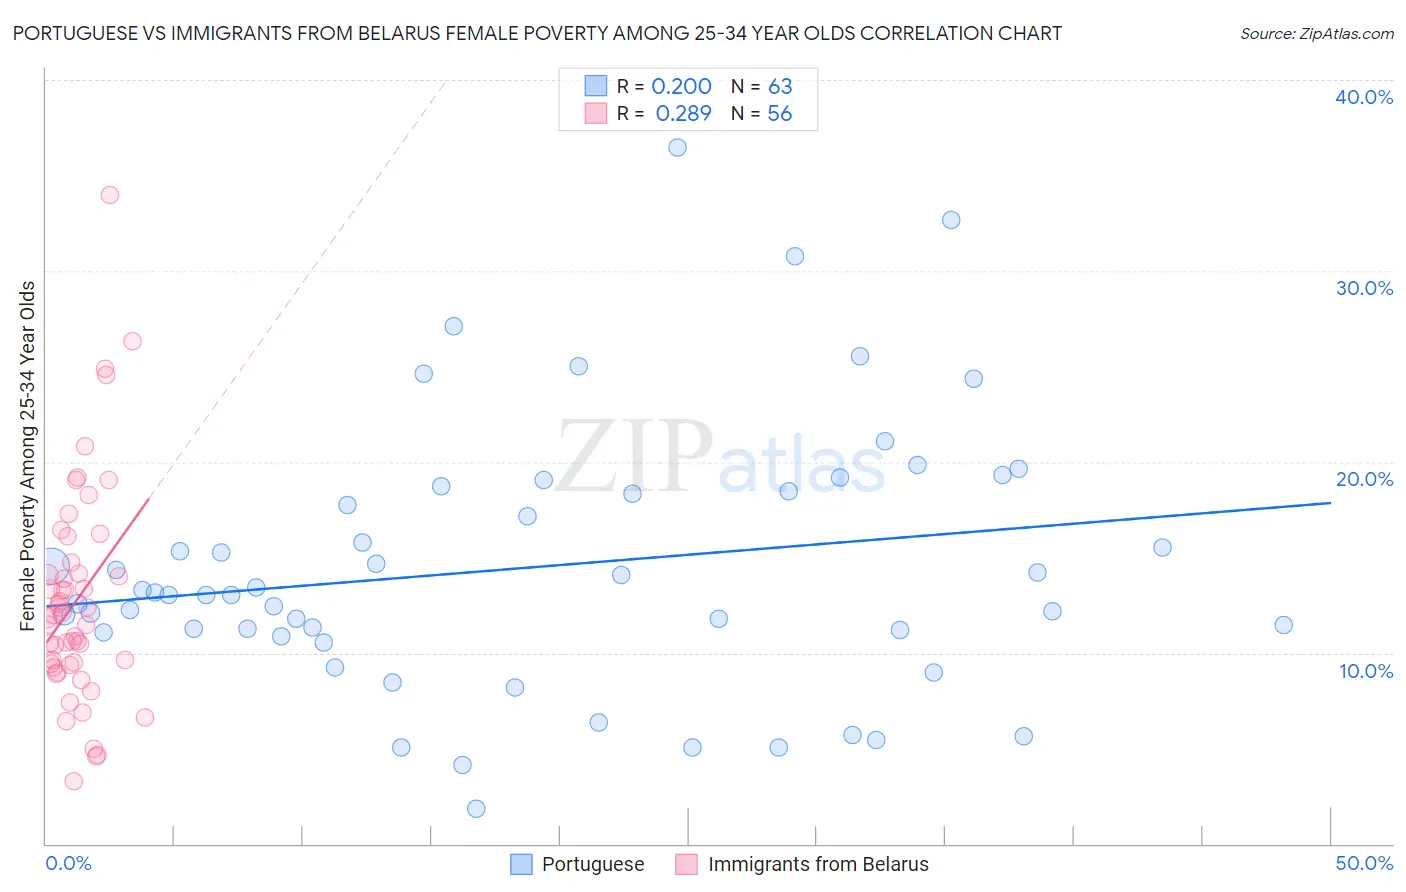 Portuguese vs Immigrants from Belarus Female Poverty Among 25-34 Year Olds